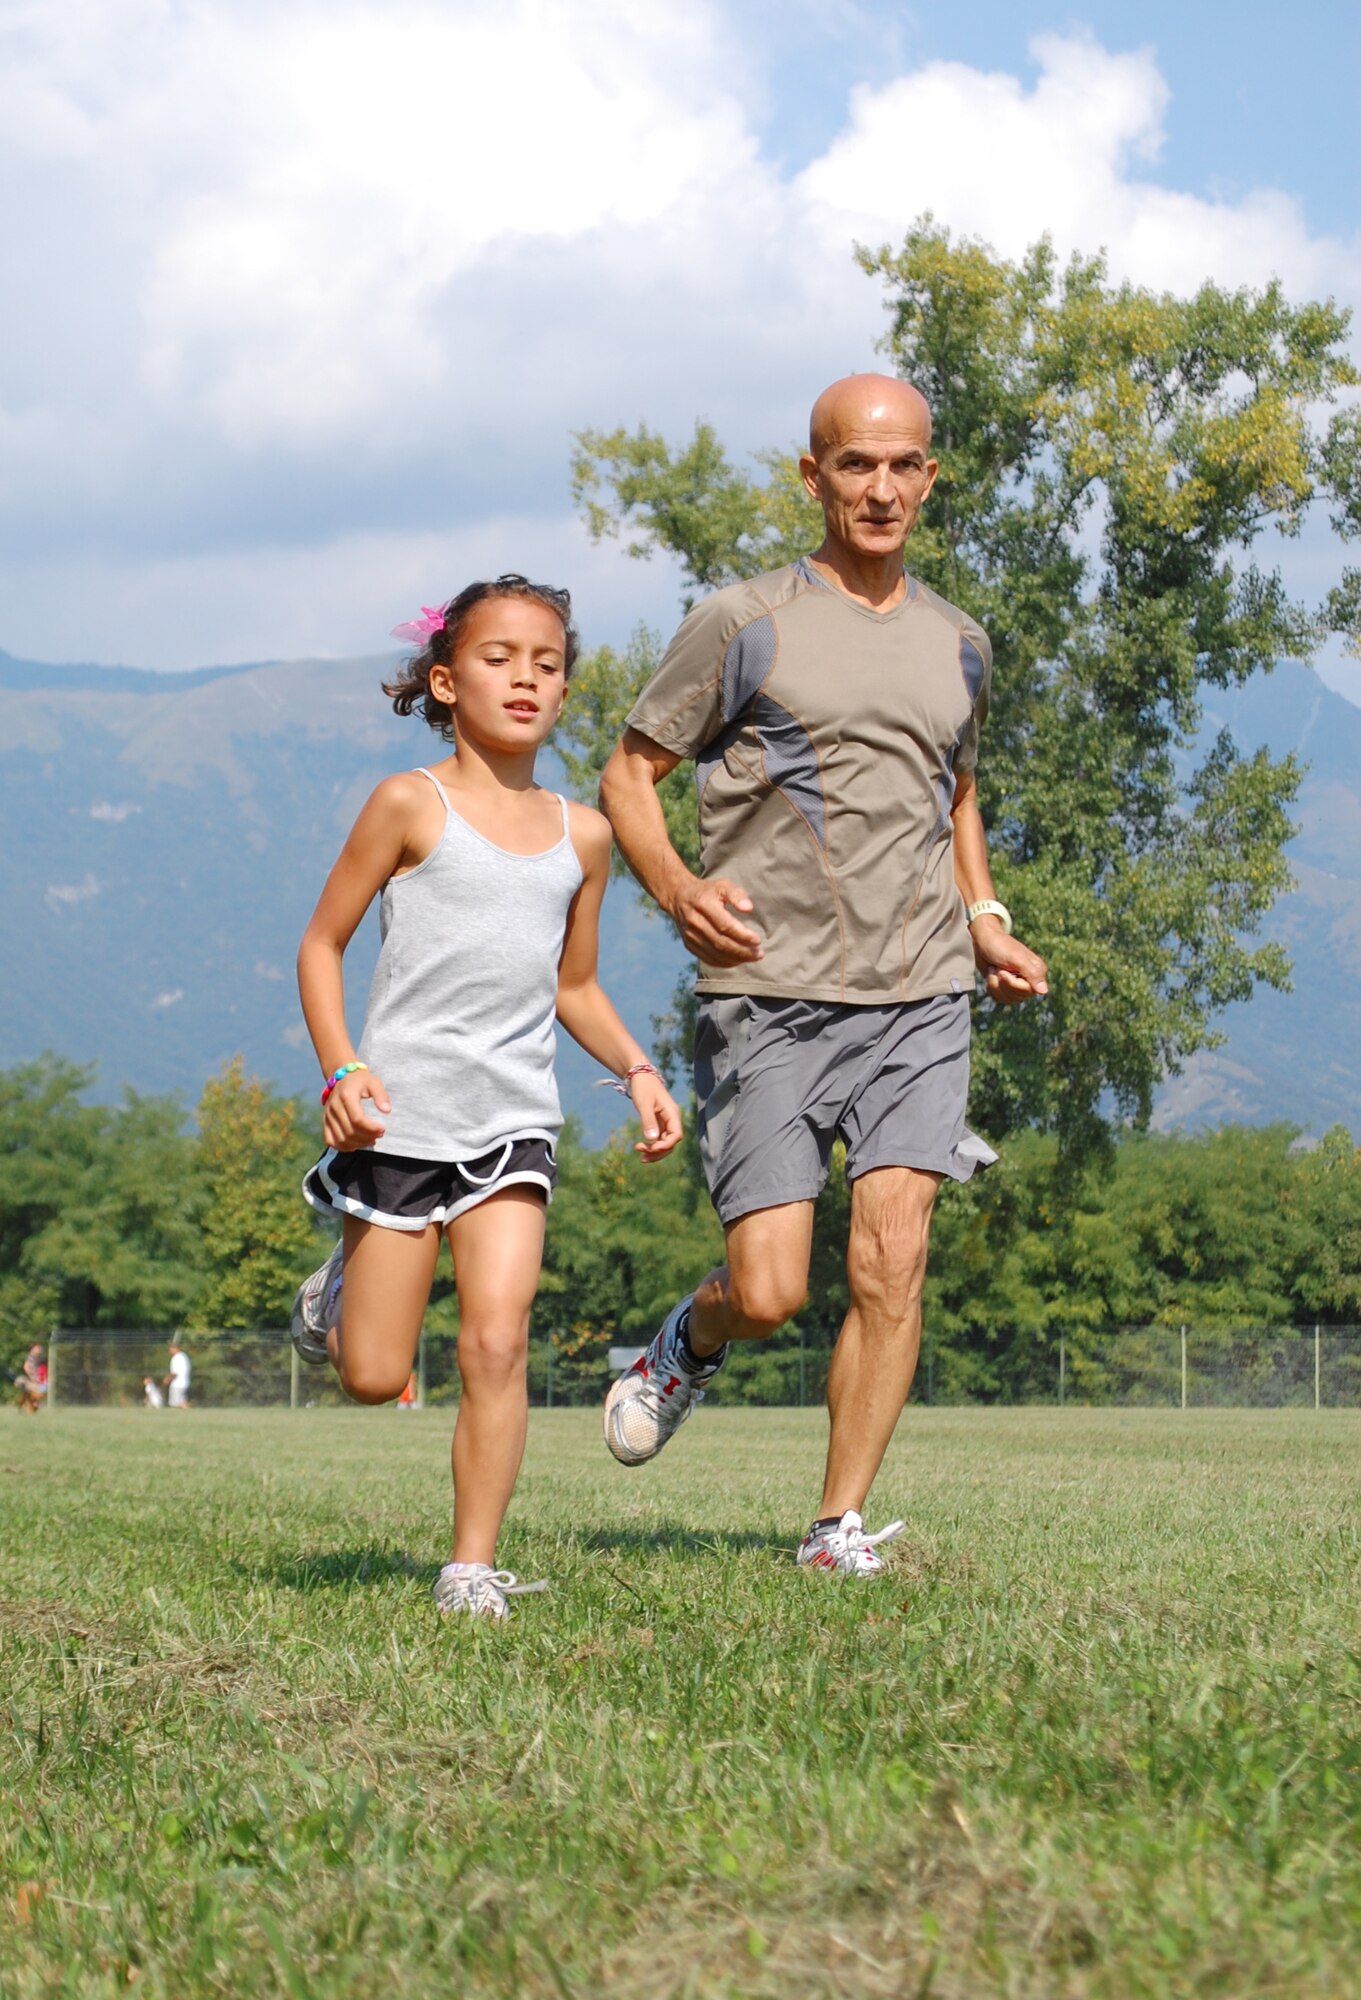 Huseyin Kara runs alongside his daughter, Emma, as she competes in the one-mile children's fun run Sept. 13, 2009 in Area D located outside Aviano Air Base in the town of Aviano, Italy. The children's race was part of the Third Annual Aviano Marathon celebration. (U.S. Air Force photo/Staff Sgt. Lindsey Maurice)